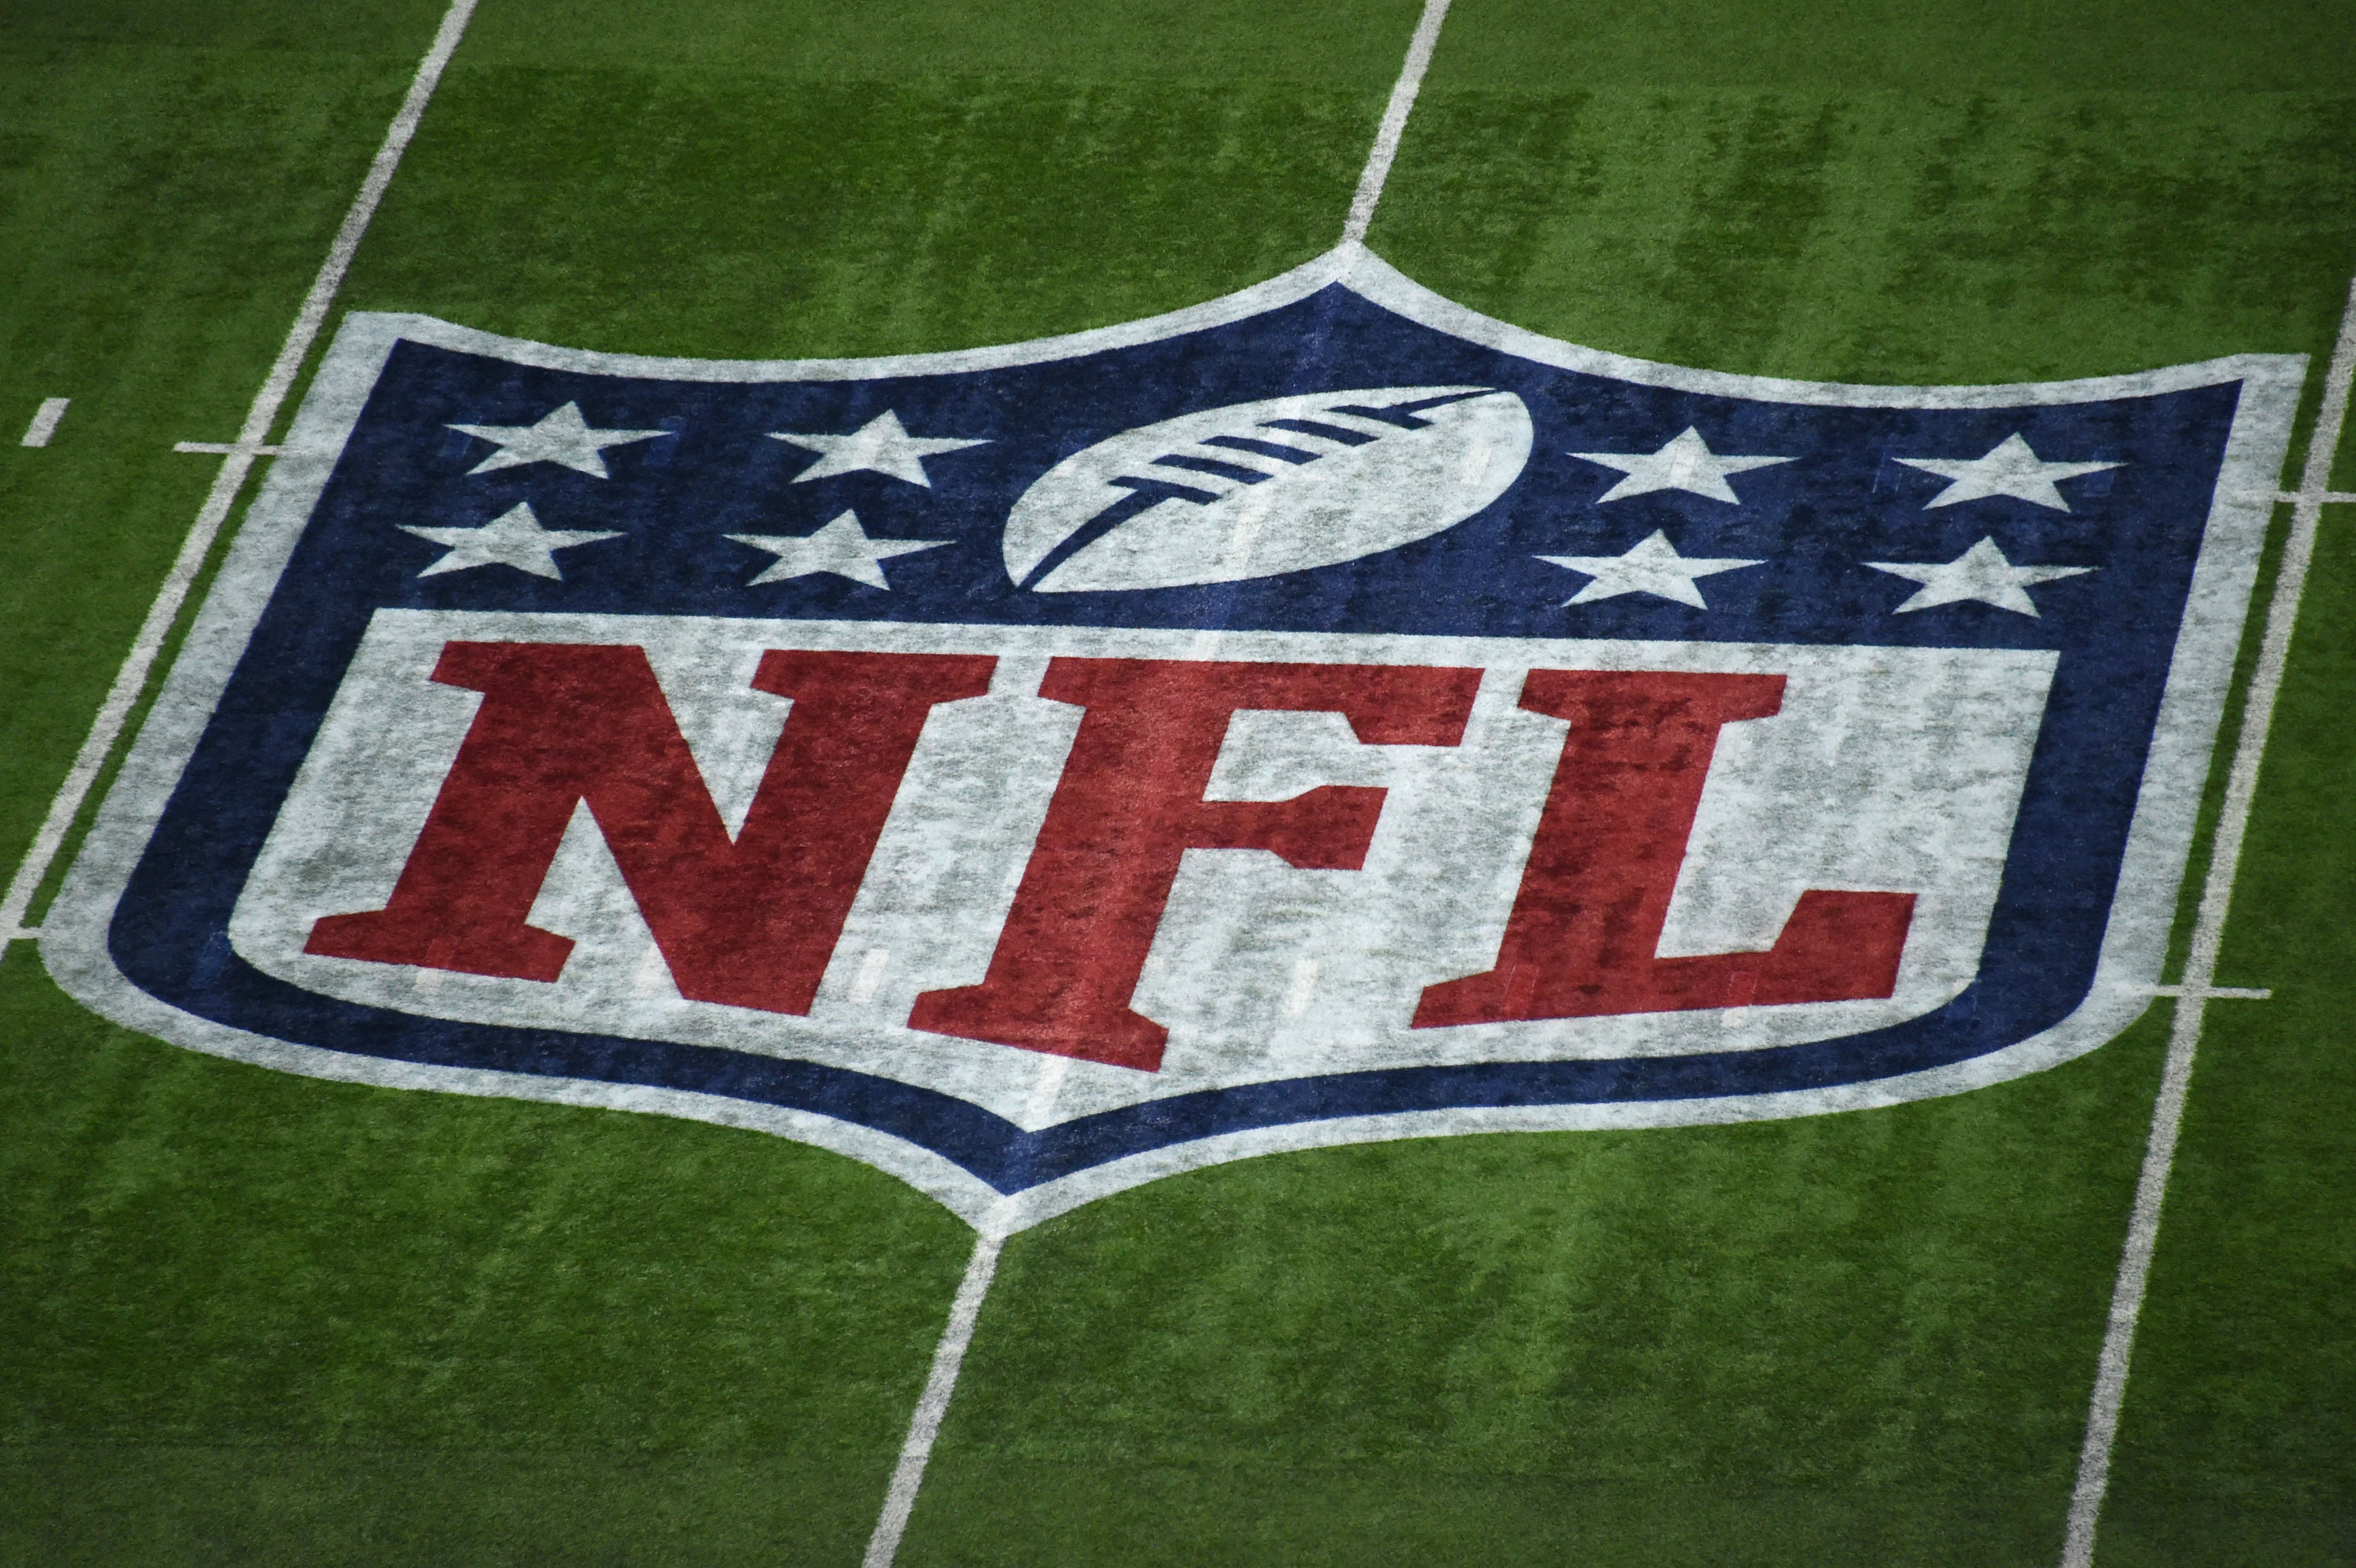 NFL: Snitch on Colleagues, Get a Reduced PED Suspension